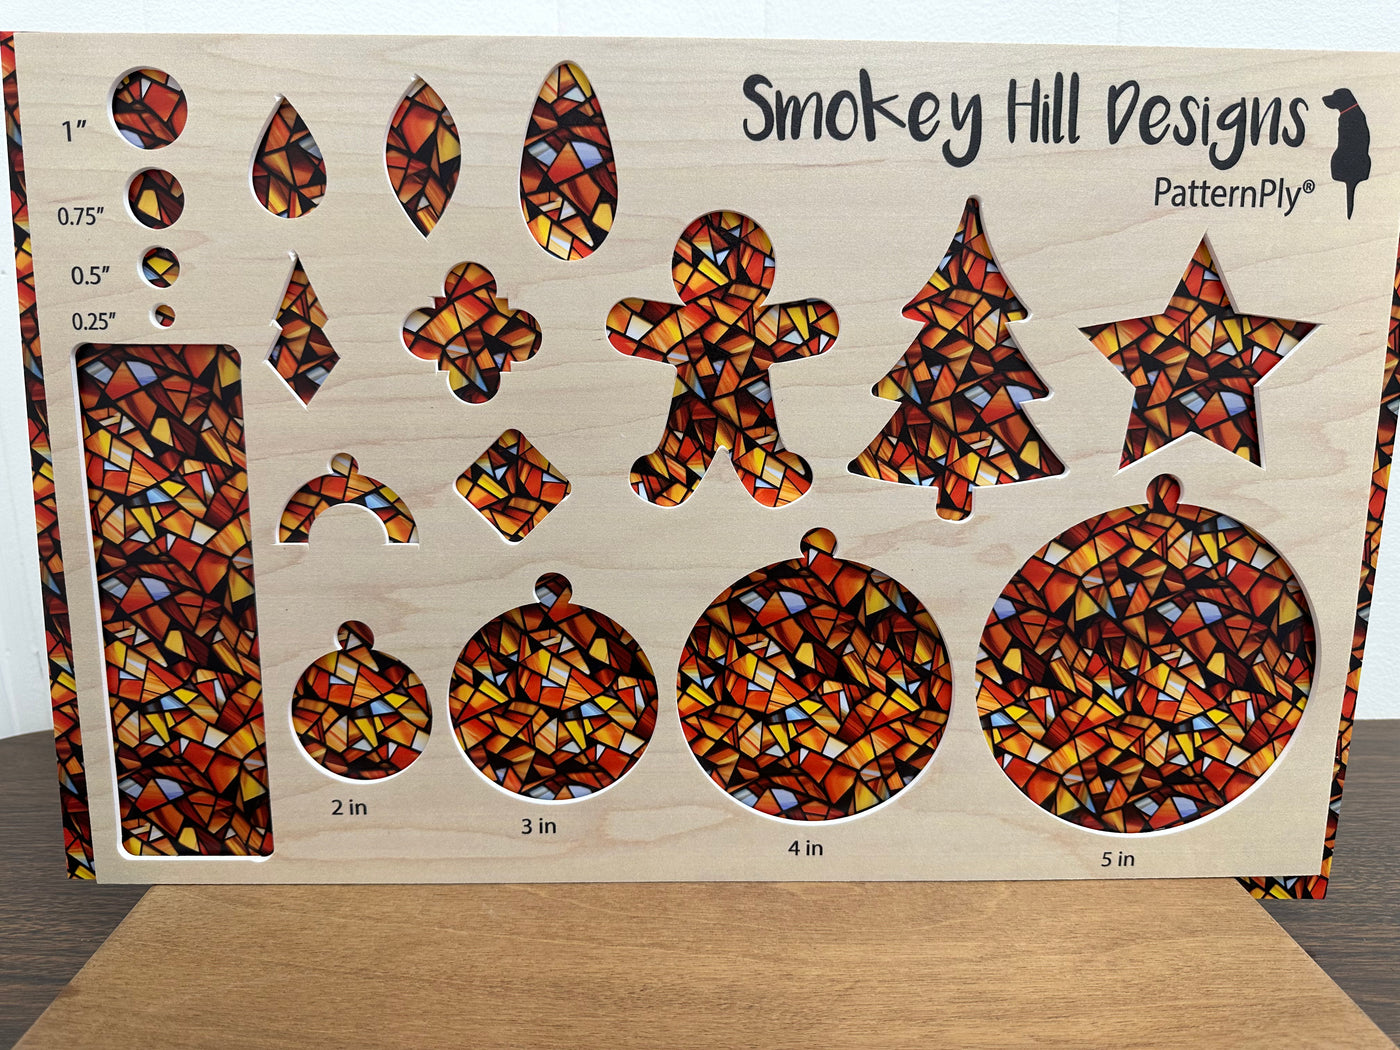 PatternPly® Abstract Candy Corn Stained Glass